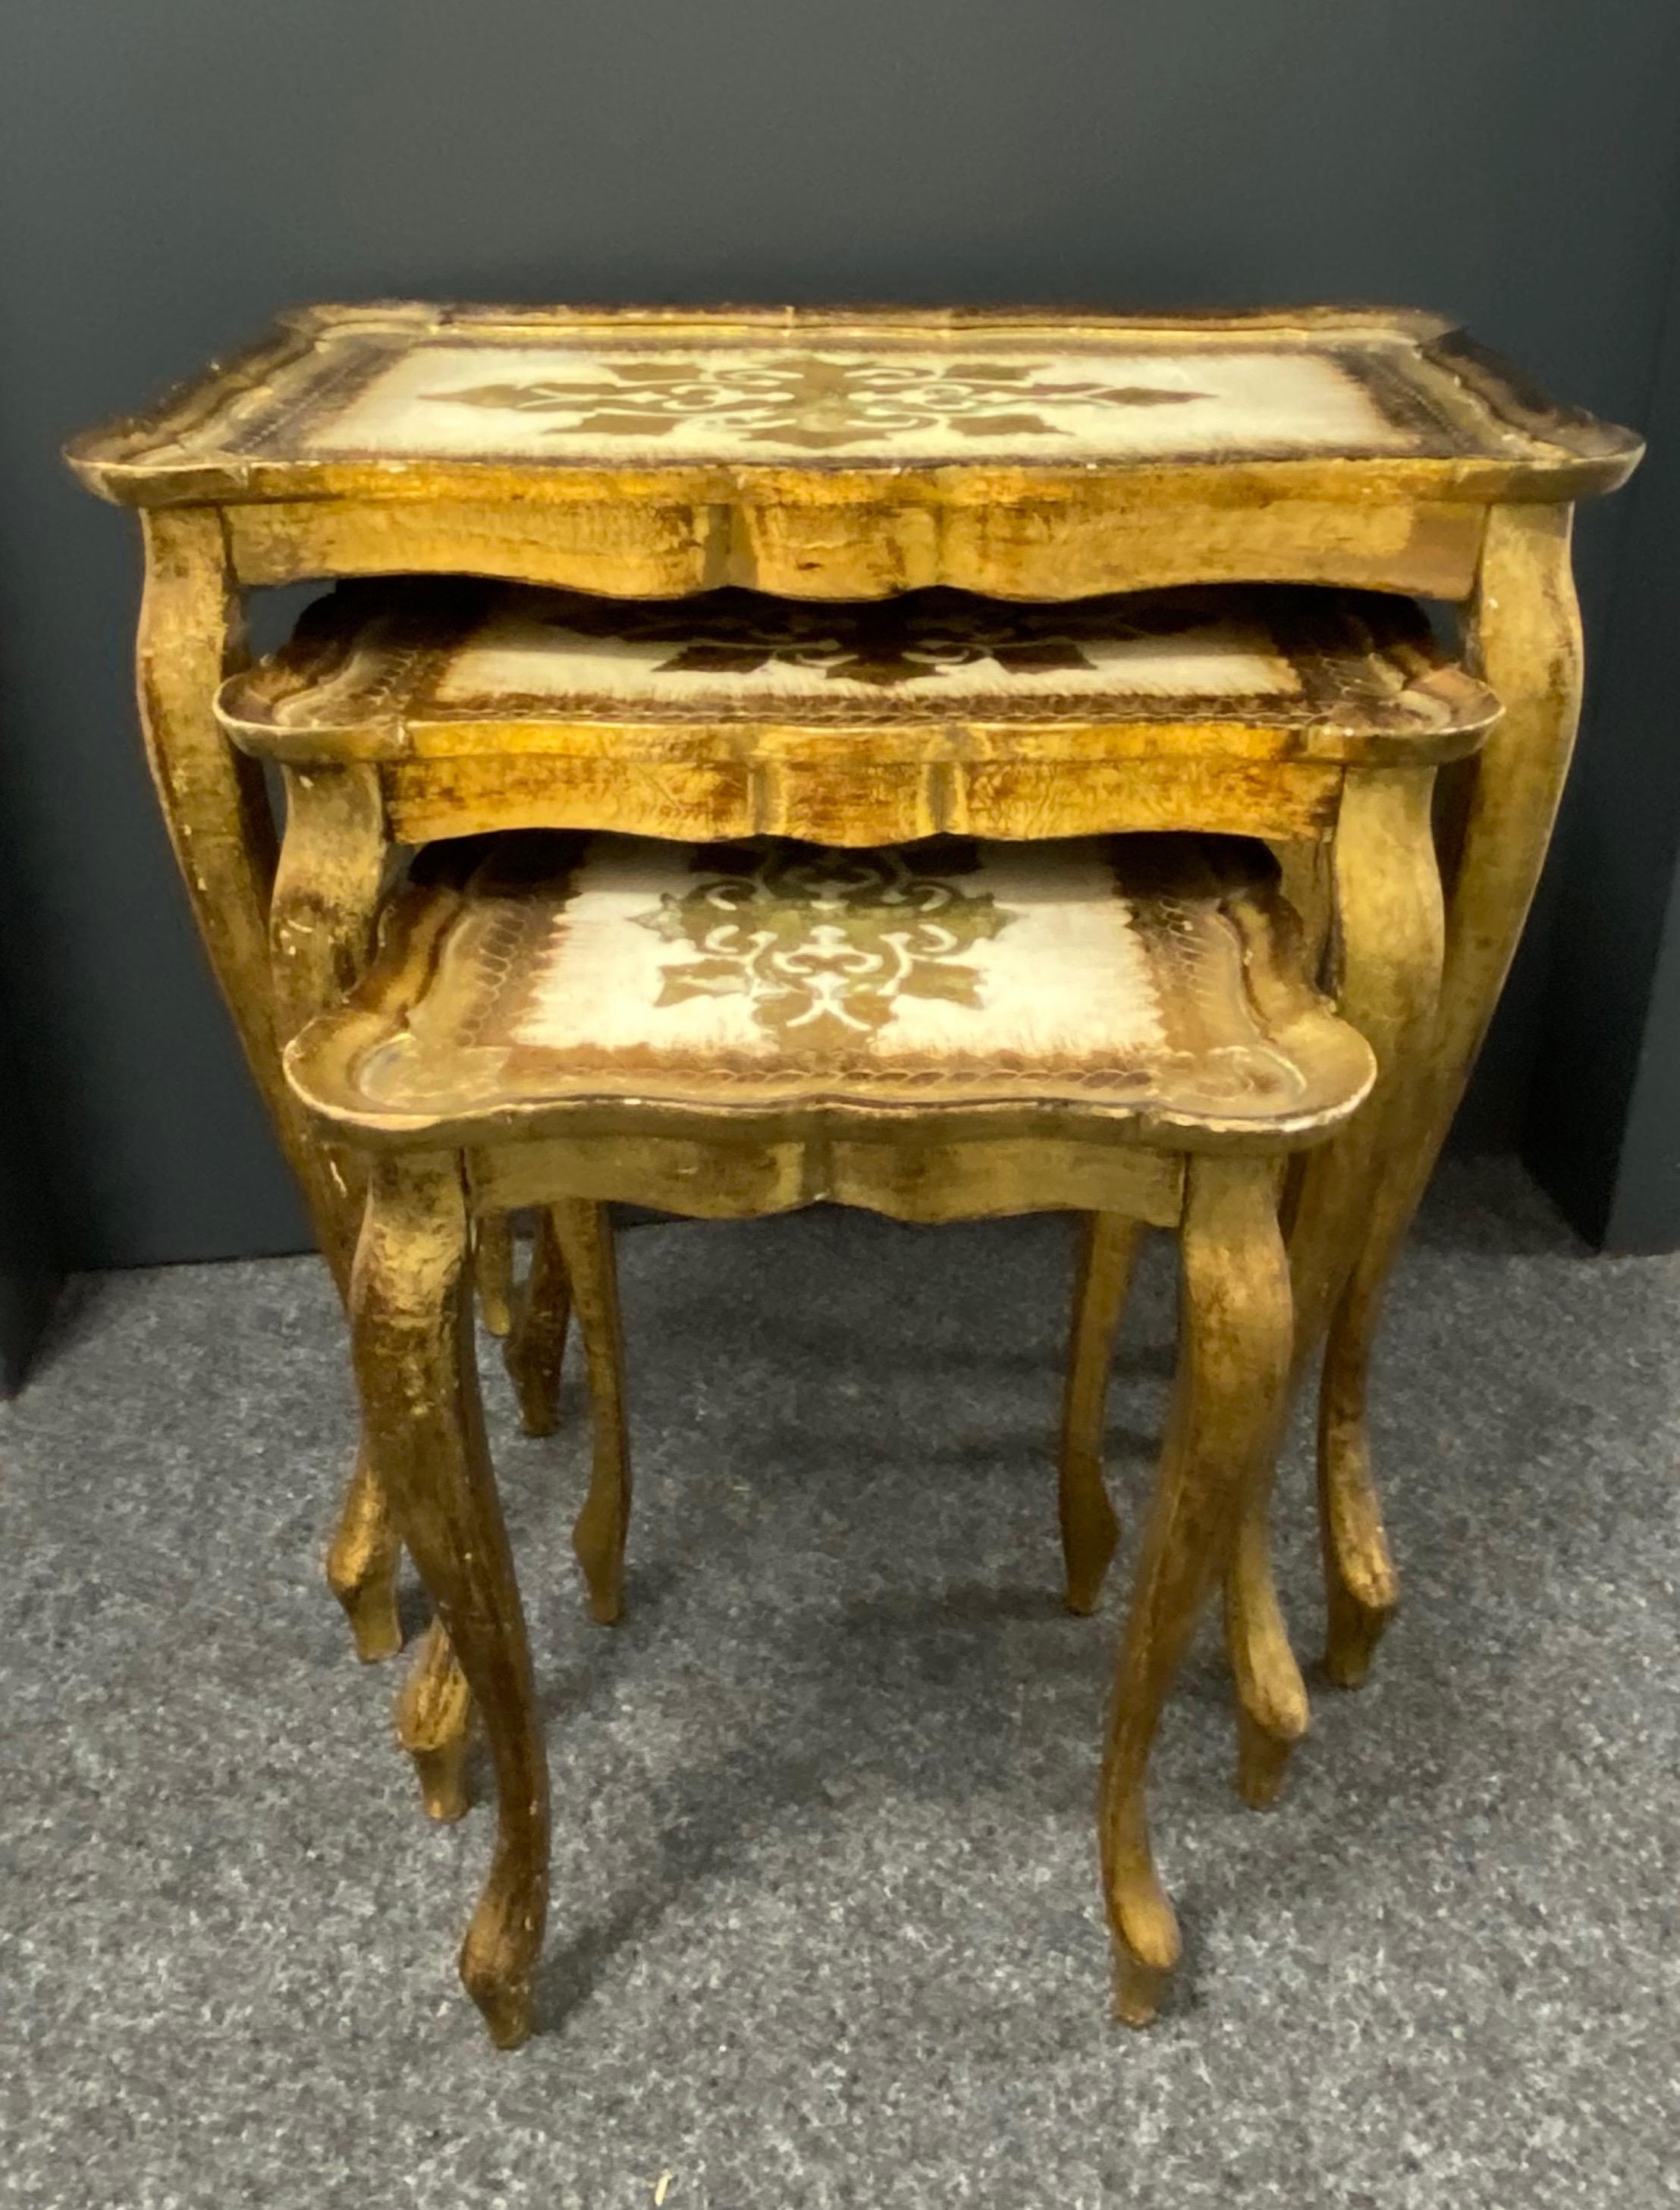 This set of three Florentine-style nesting tables was made in Italy, circa 1960. They feature cabriole legs and intricate hand painted details on the tabletops with scalloped edges. The gilded wood has a beautifully weathered patina. These pieces